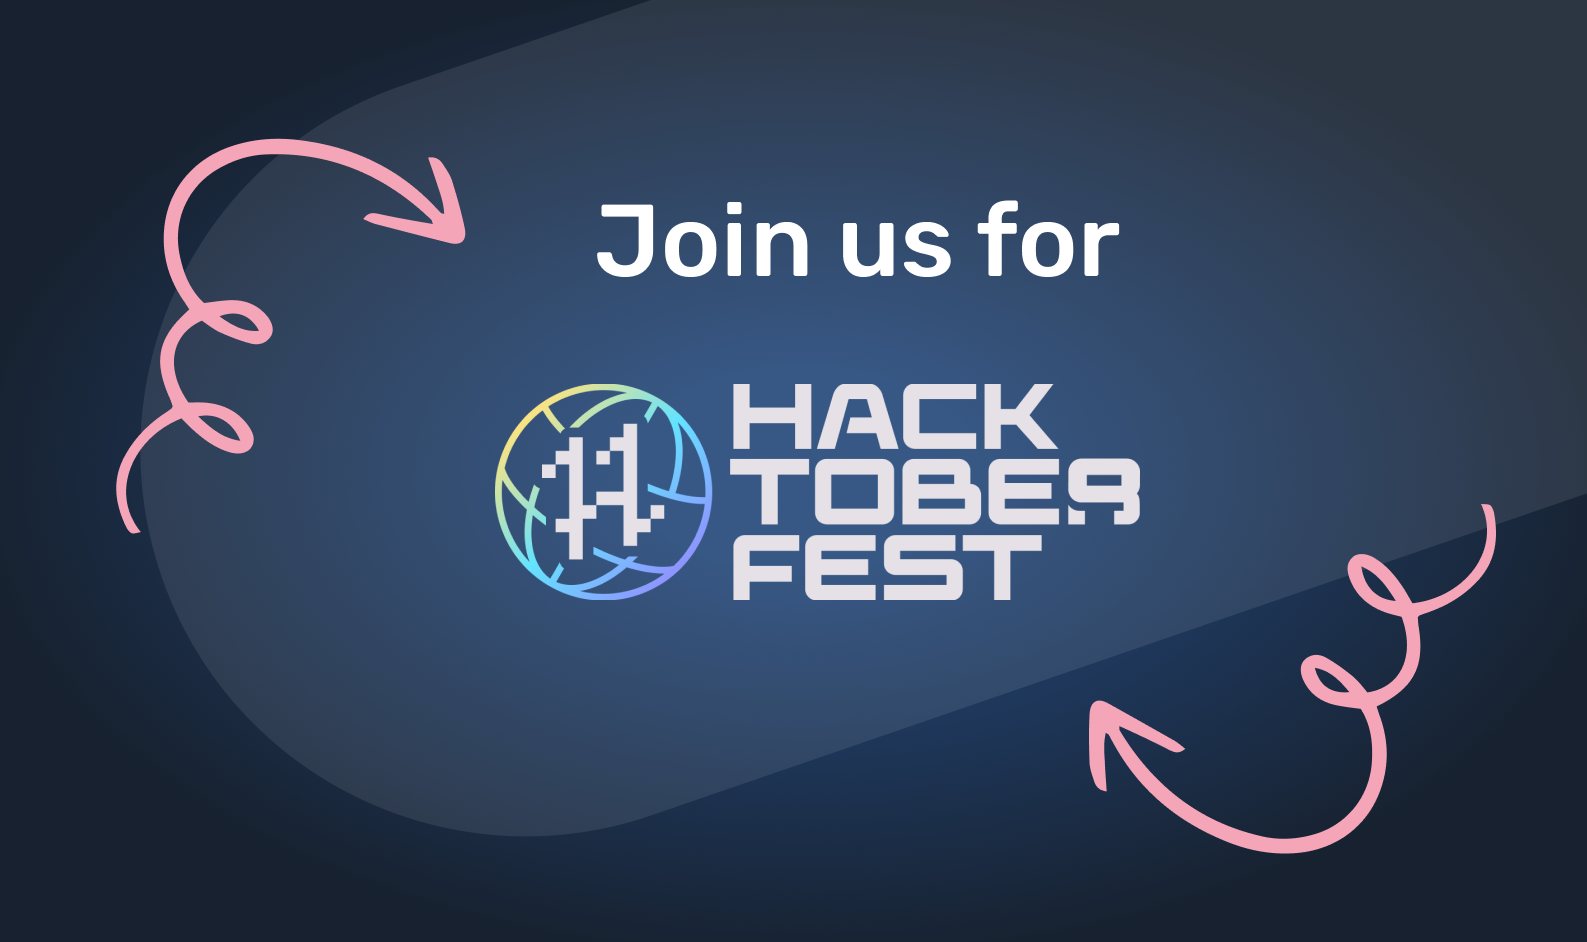 Join us for Hacktoberfest